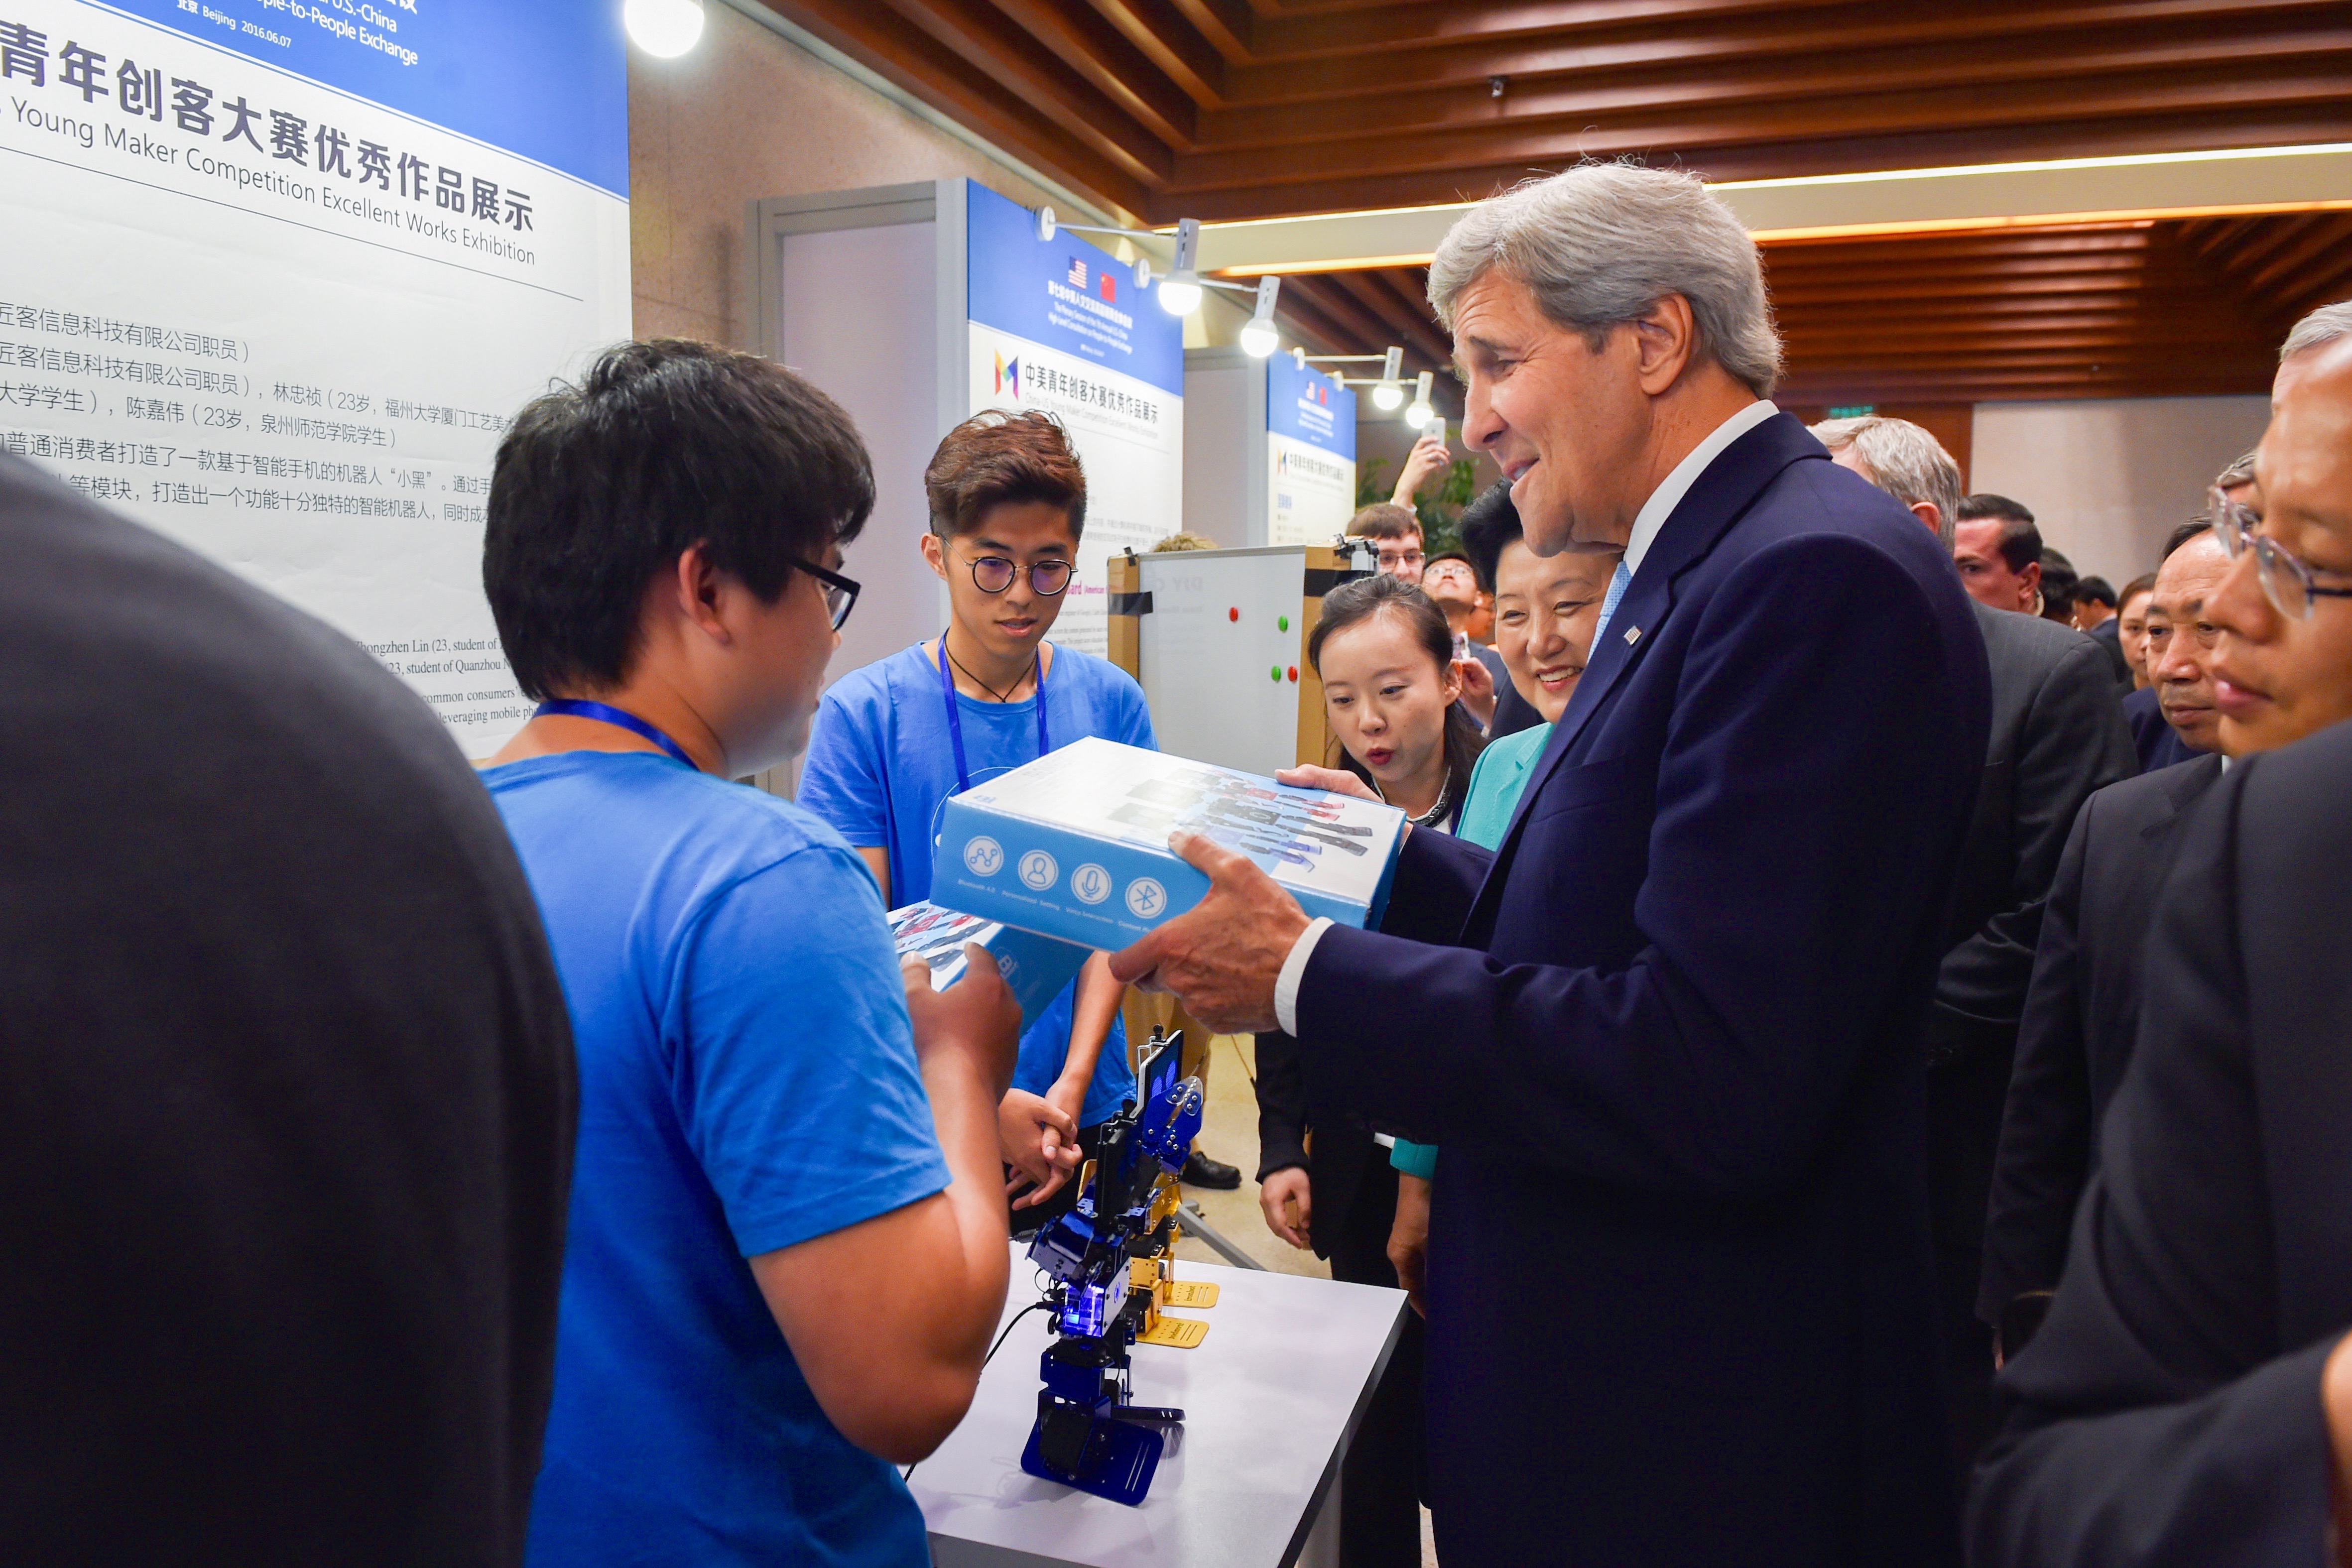 Ironbot was sent as a gift from Chinese young maker to US secretary of state Kerry and Chinese Vice Premier Liu, Yandong.